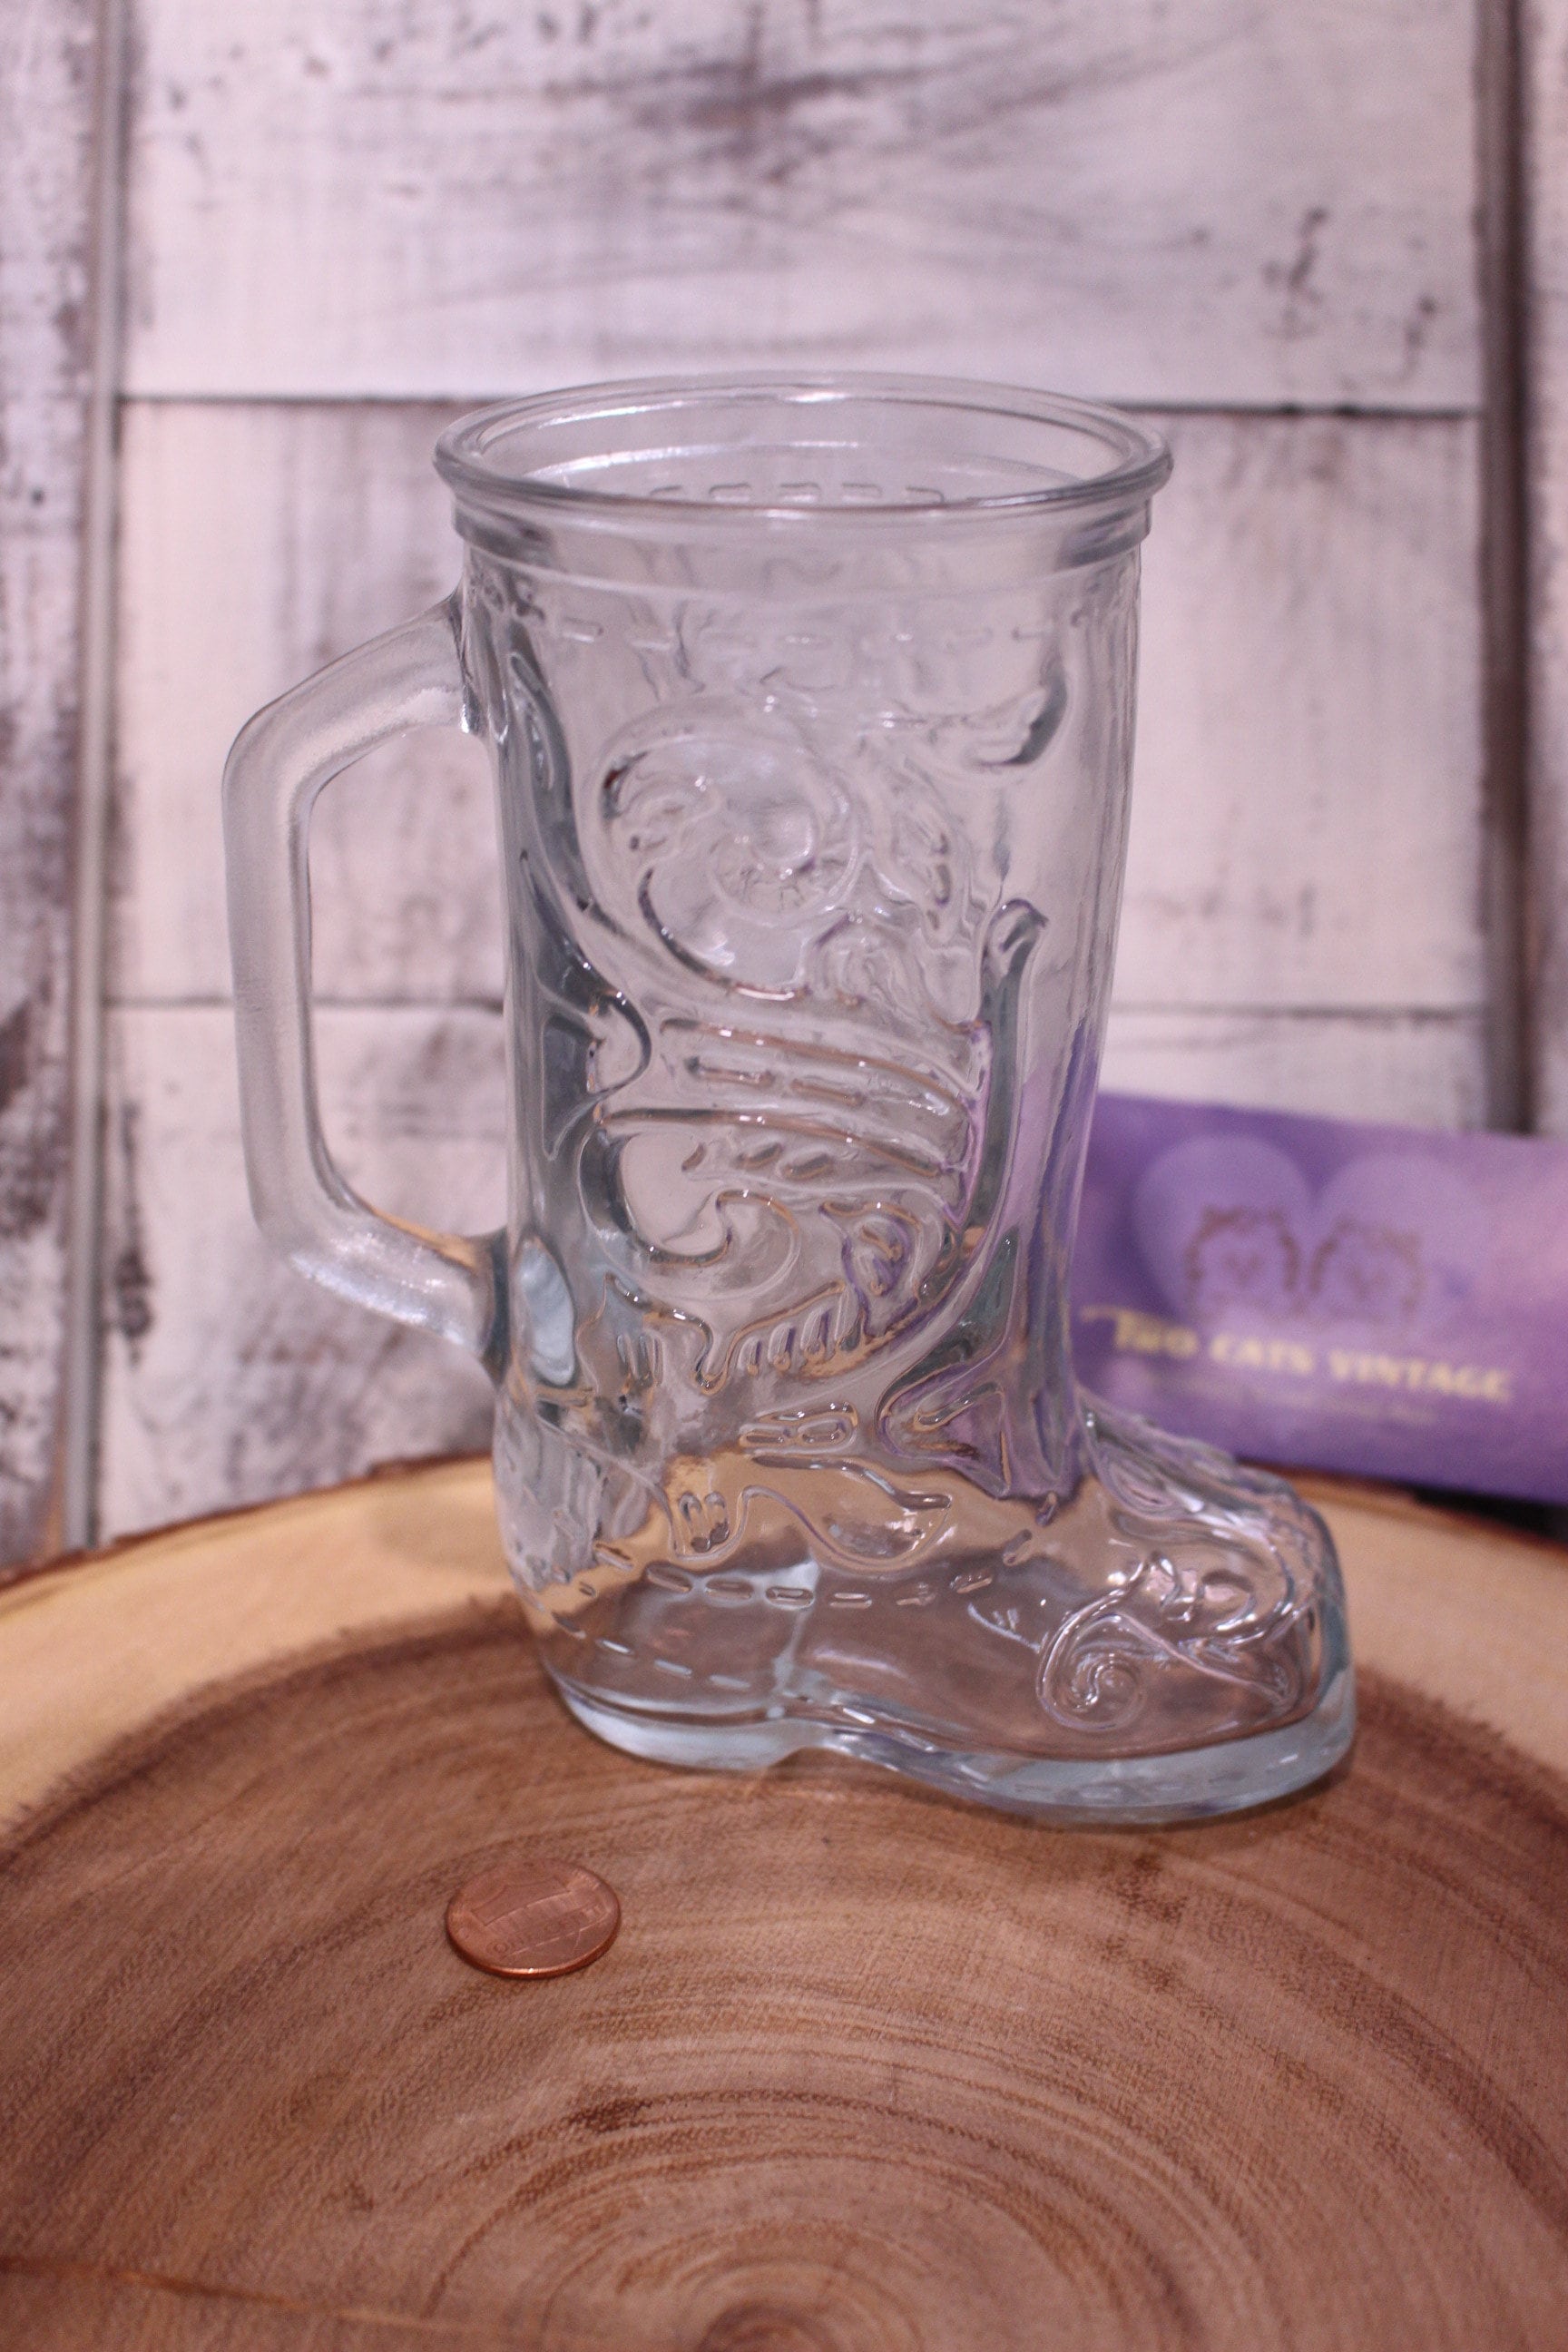 12.5 oz Anchor Hocking Boot Beer Mug - Laser engraved with your